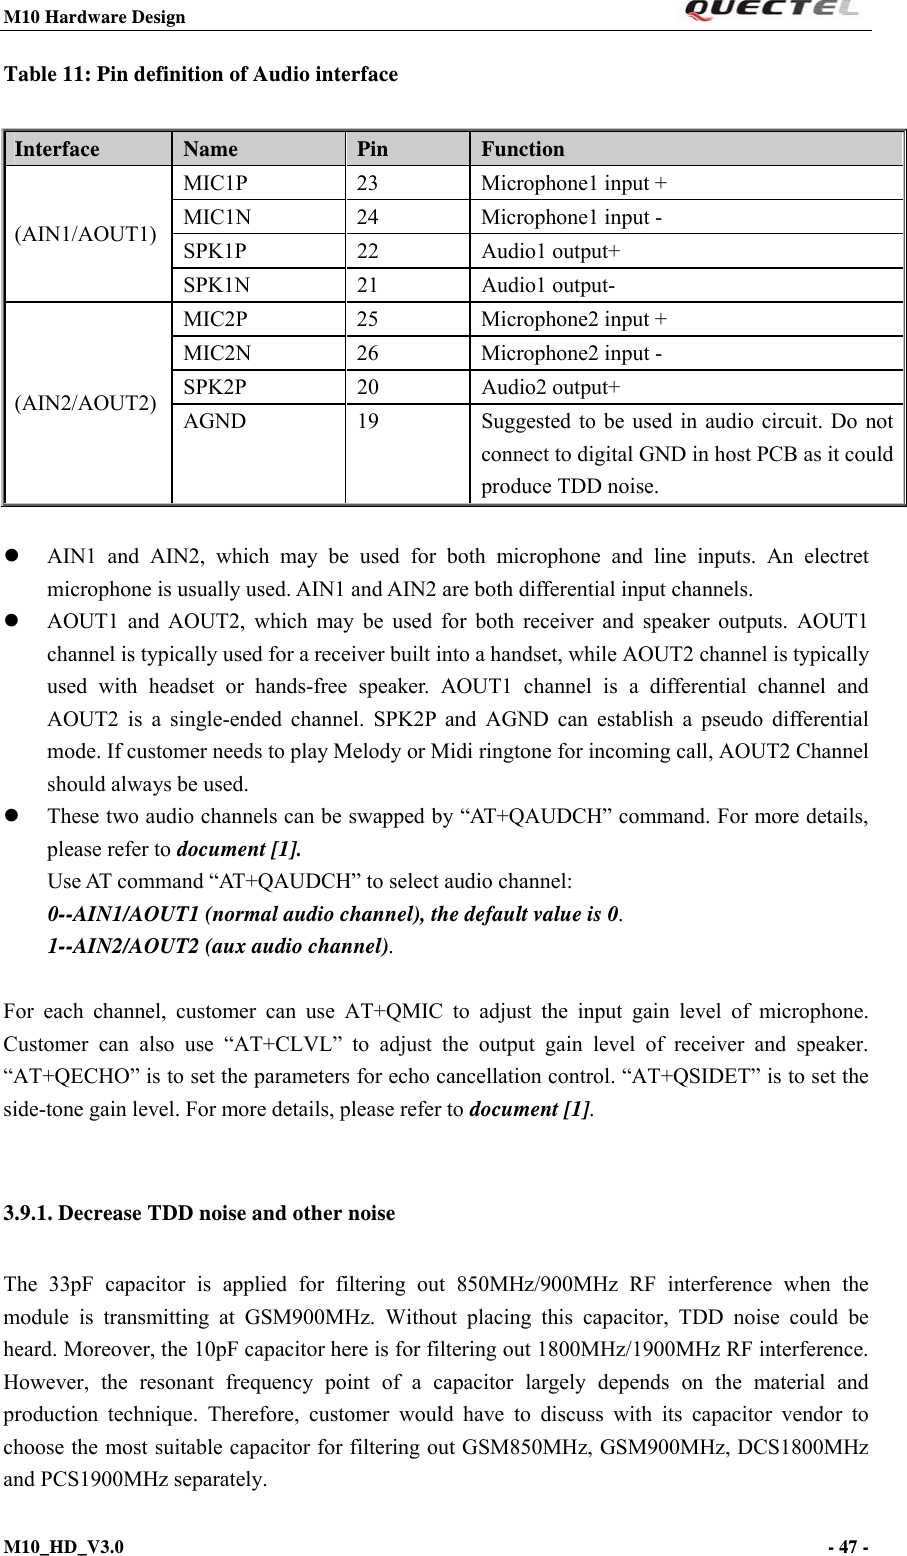 M10 Hardware Design                                                                 M10_HD_V3.0                                                                      - 47 -  Table 11: Pin definition of Audio interface   AIN1 and AIN2, which may be used for both microphone and line inputs. An electret microphone is usually used. AIN1 and AIN2 are both differential input channels.  AOUT1 and AOUT2, which may be used for both receiver and speaker outputs. AOUT1 channel is typically used for a receiver built into a handset, while AOUT2 channel is typically used with headset or hands-free speaker. AOUT1 channel is a differential channel and AOUT2 is a single-ended channel. SPK2P and AGND can establish a pseudo differential mode. If customer needs to play Melody or Midi ringtone for incoming call, AOUT2 Channel should always be used.  These two audio channels can be swapped by “AT+QAUDCH” command. For more details, please refer to document [1]. Use AT command “AT+QAUDCH” to select audio channel: 0--AIN1/AOUT1 (normal audio channel), the default value is 0. 1--AIN2/AOUT2 (aux audio channel).  For each channel, customer can use AT+QMIC to adjust the input gain level of microphone. Customer can also use “AT+CLVL” to adjust the output gain level of receiver and speaker. “AT+QECHO” is to set the parameters for echo cancellation control. “AT+QSIDET” is to set the side-tone gain level. For more details, please refer to document [1].  3.9.1. Decrease TDD noise and other noise The 33pF capacitor is applied for filtering out 850MHz/900MHz RF interference when the module is transmitting at GSM900MHz. Without placing this capacitor, TDD noise could be heard. Moreover, the 10pF capacitor here is for filtering out 1800MHz/1900MHz RF interference. However, the resonant frequency point of a capacitor largely depends on the material and production technique. Therefore, customer would have to discuss with its capacitor vendor to choose the most suitable capacitor for filtering out GSM850MHz, GSM900MHz, DCS1800MHz and PCS1900MHz separately.   Interface  Name  Pin  Function (AIN1/AOUT1) MIC1P 23 Microphone1 input + MIC1N 24 Microphone1 input - SPK1P 22 Audio1 output+ SPK1N 21 Audio1 output- (AIN2/AOUT2) MIC2P 25 Microphone2 input + MIC2N 26 Microphone2 input - SPK2P 20 Audio2 output+ AGND  19  Suggested to be used in audio circuit. Do not connect to digital GND in host PCB as it could produce TDD noise. 